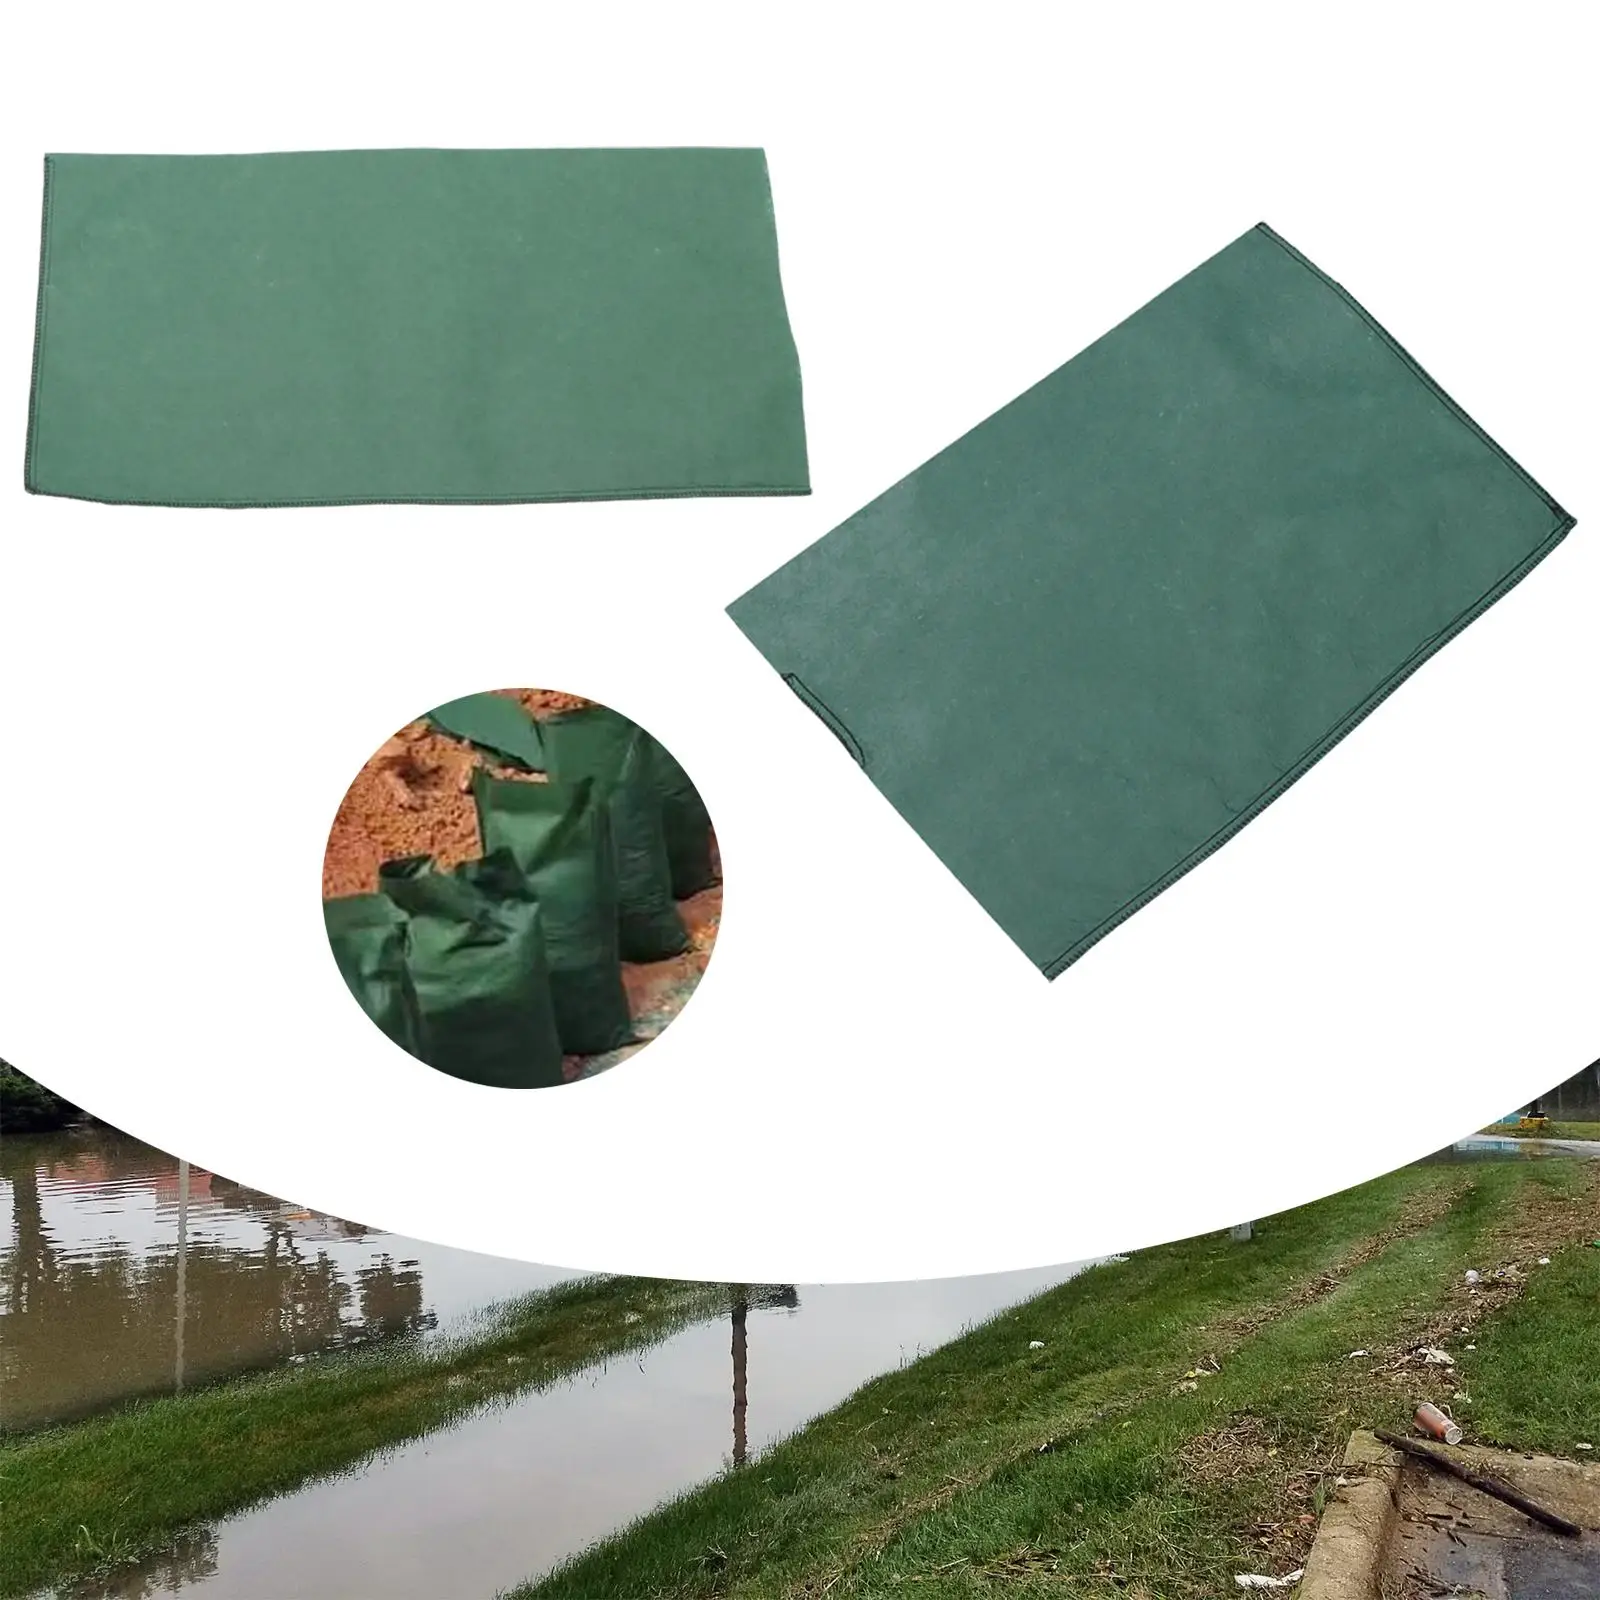 Water Barriers Rain Protection Heavy Duty Absorbent Prevention Empty Flood Prevention Barriers Flooding Absorbent Flood Barrier